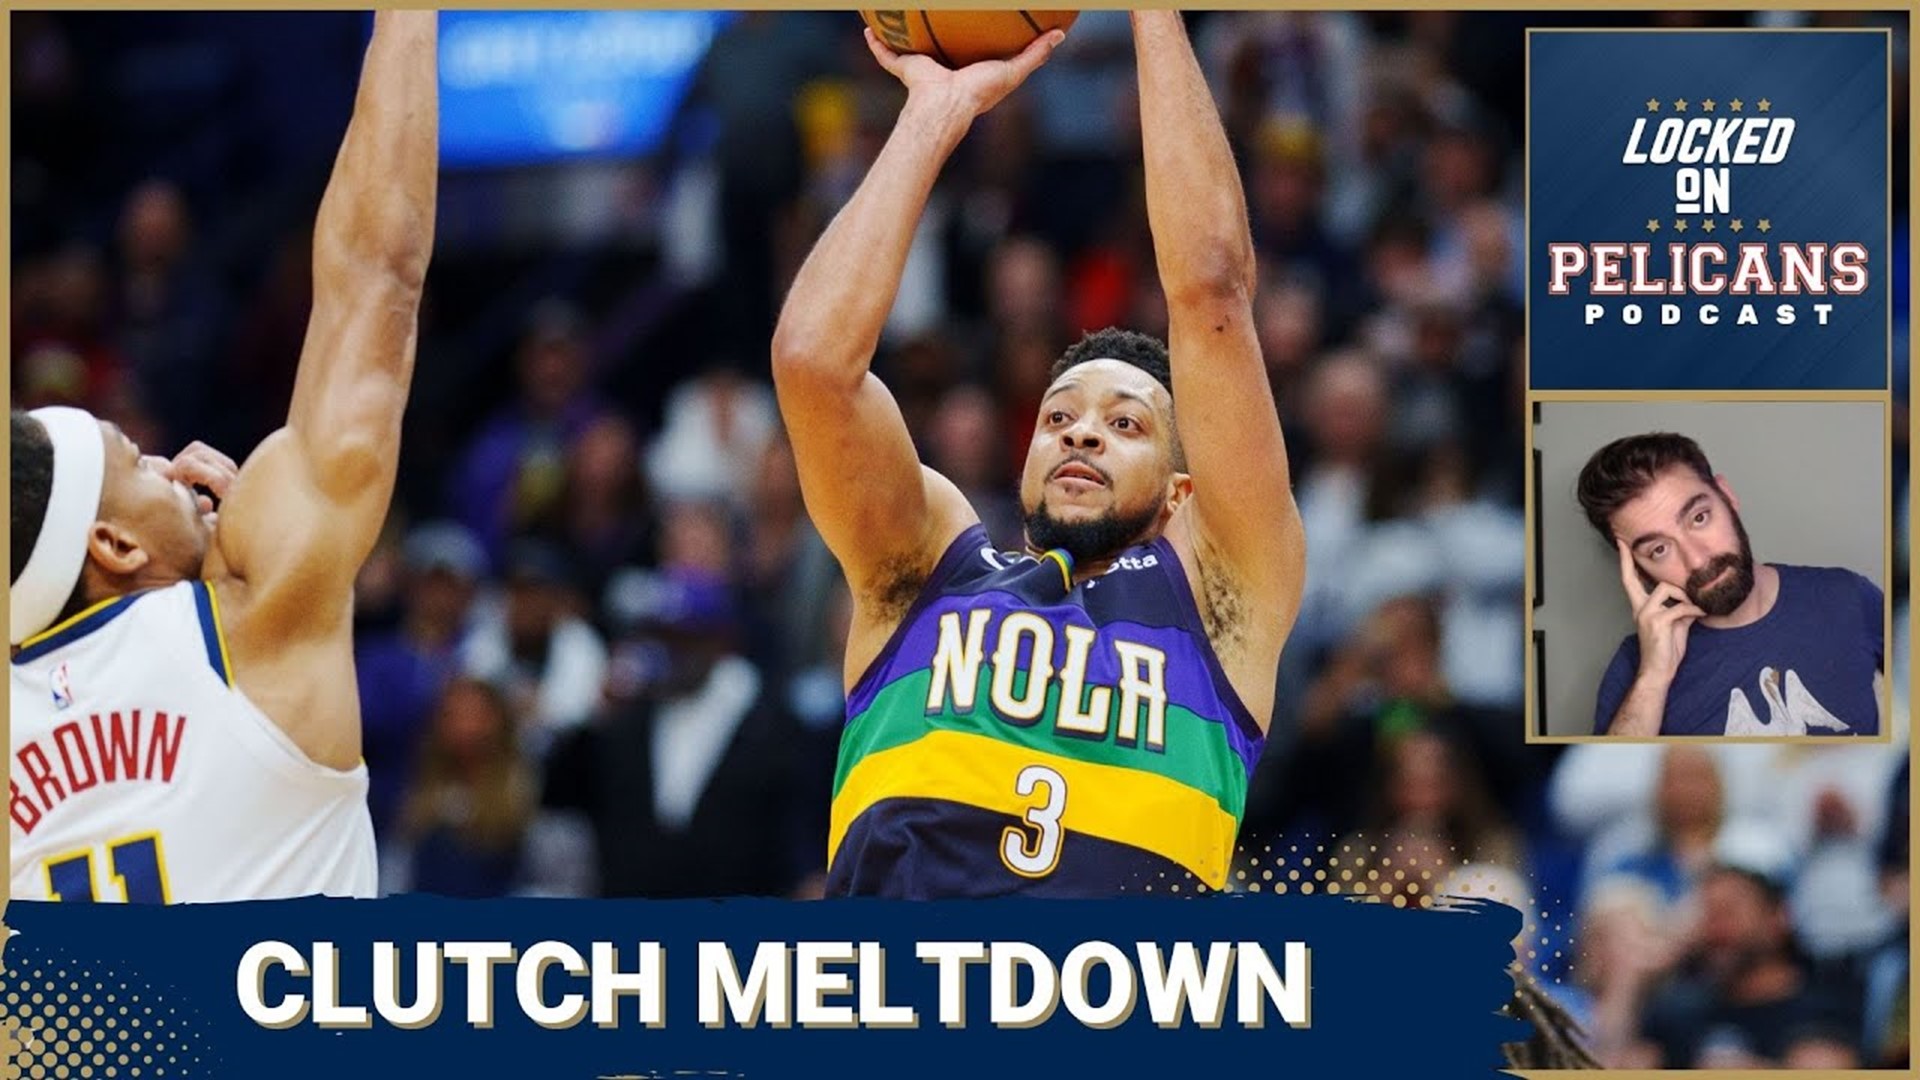 The New Orleans Pelicans had a chance to beat Nikola Jokic and the Denver Nuggets but CJ McCollum missed the game-winning shot.